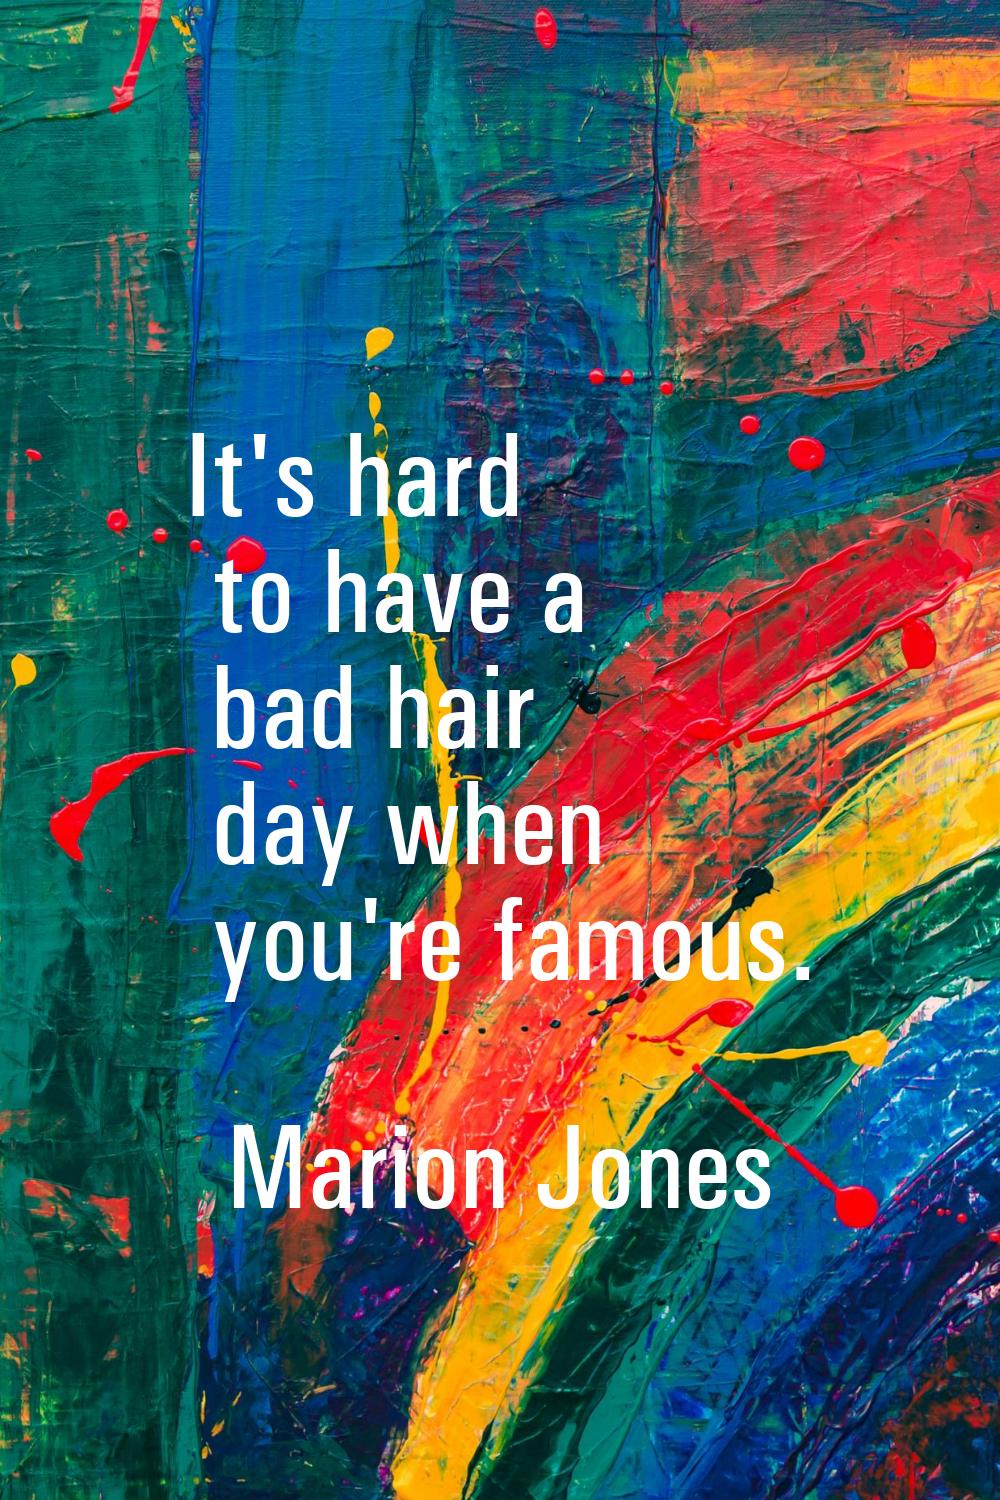 It's hard to have a bad hair day when you're famous.